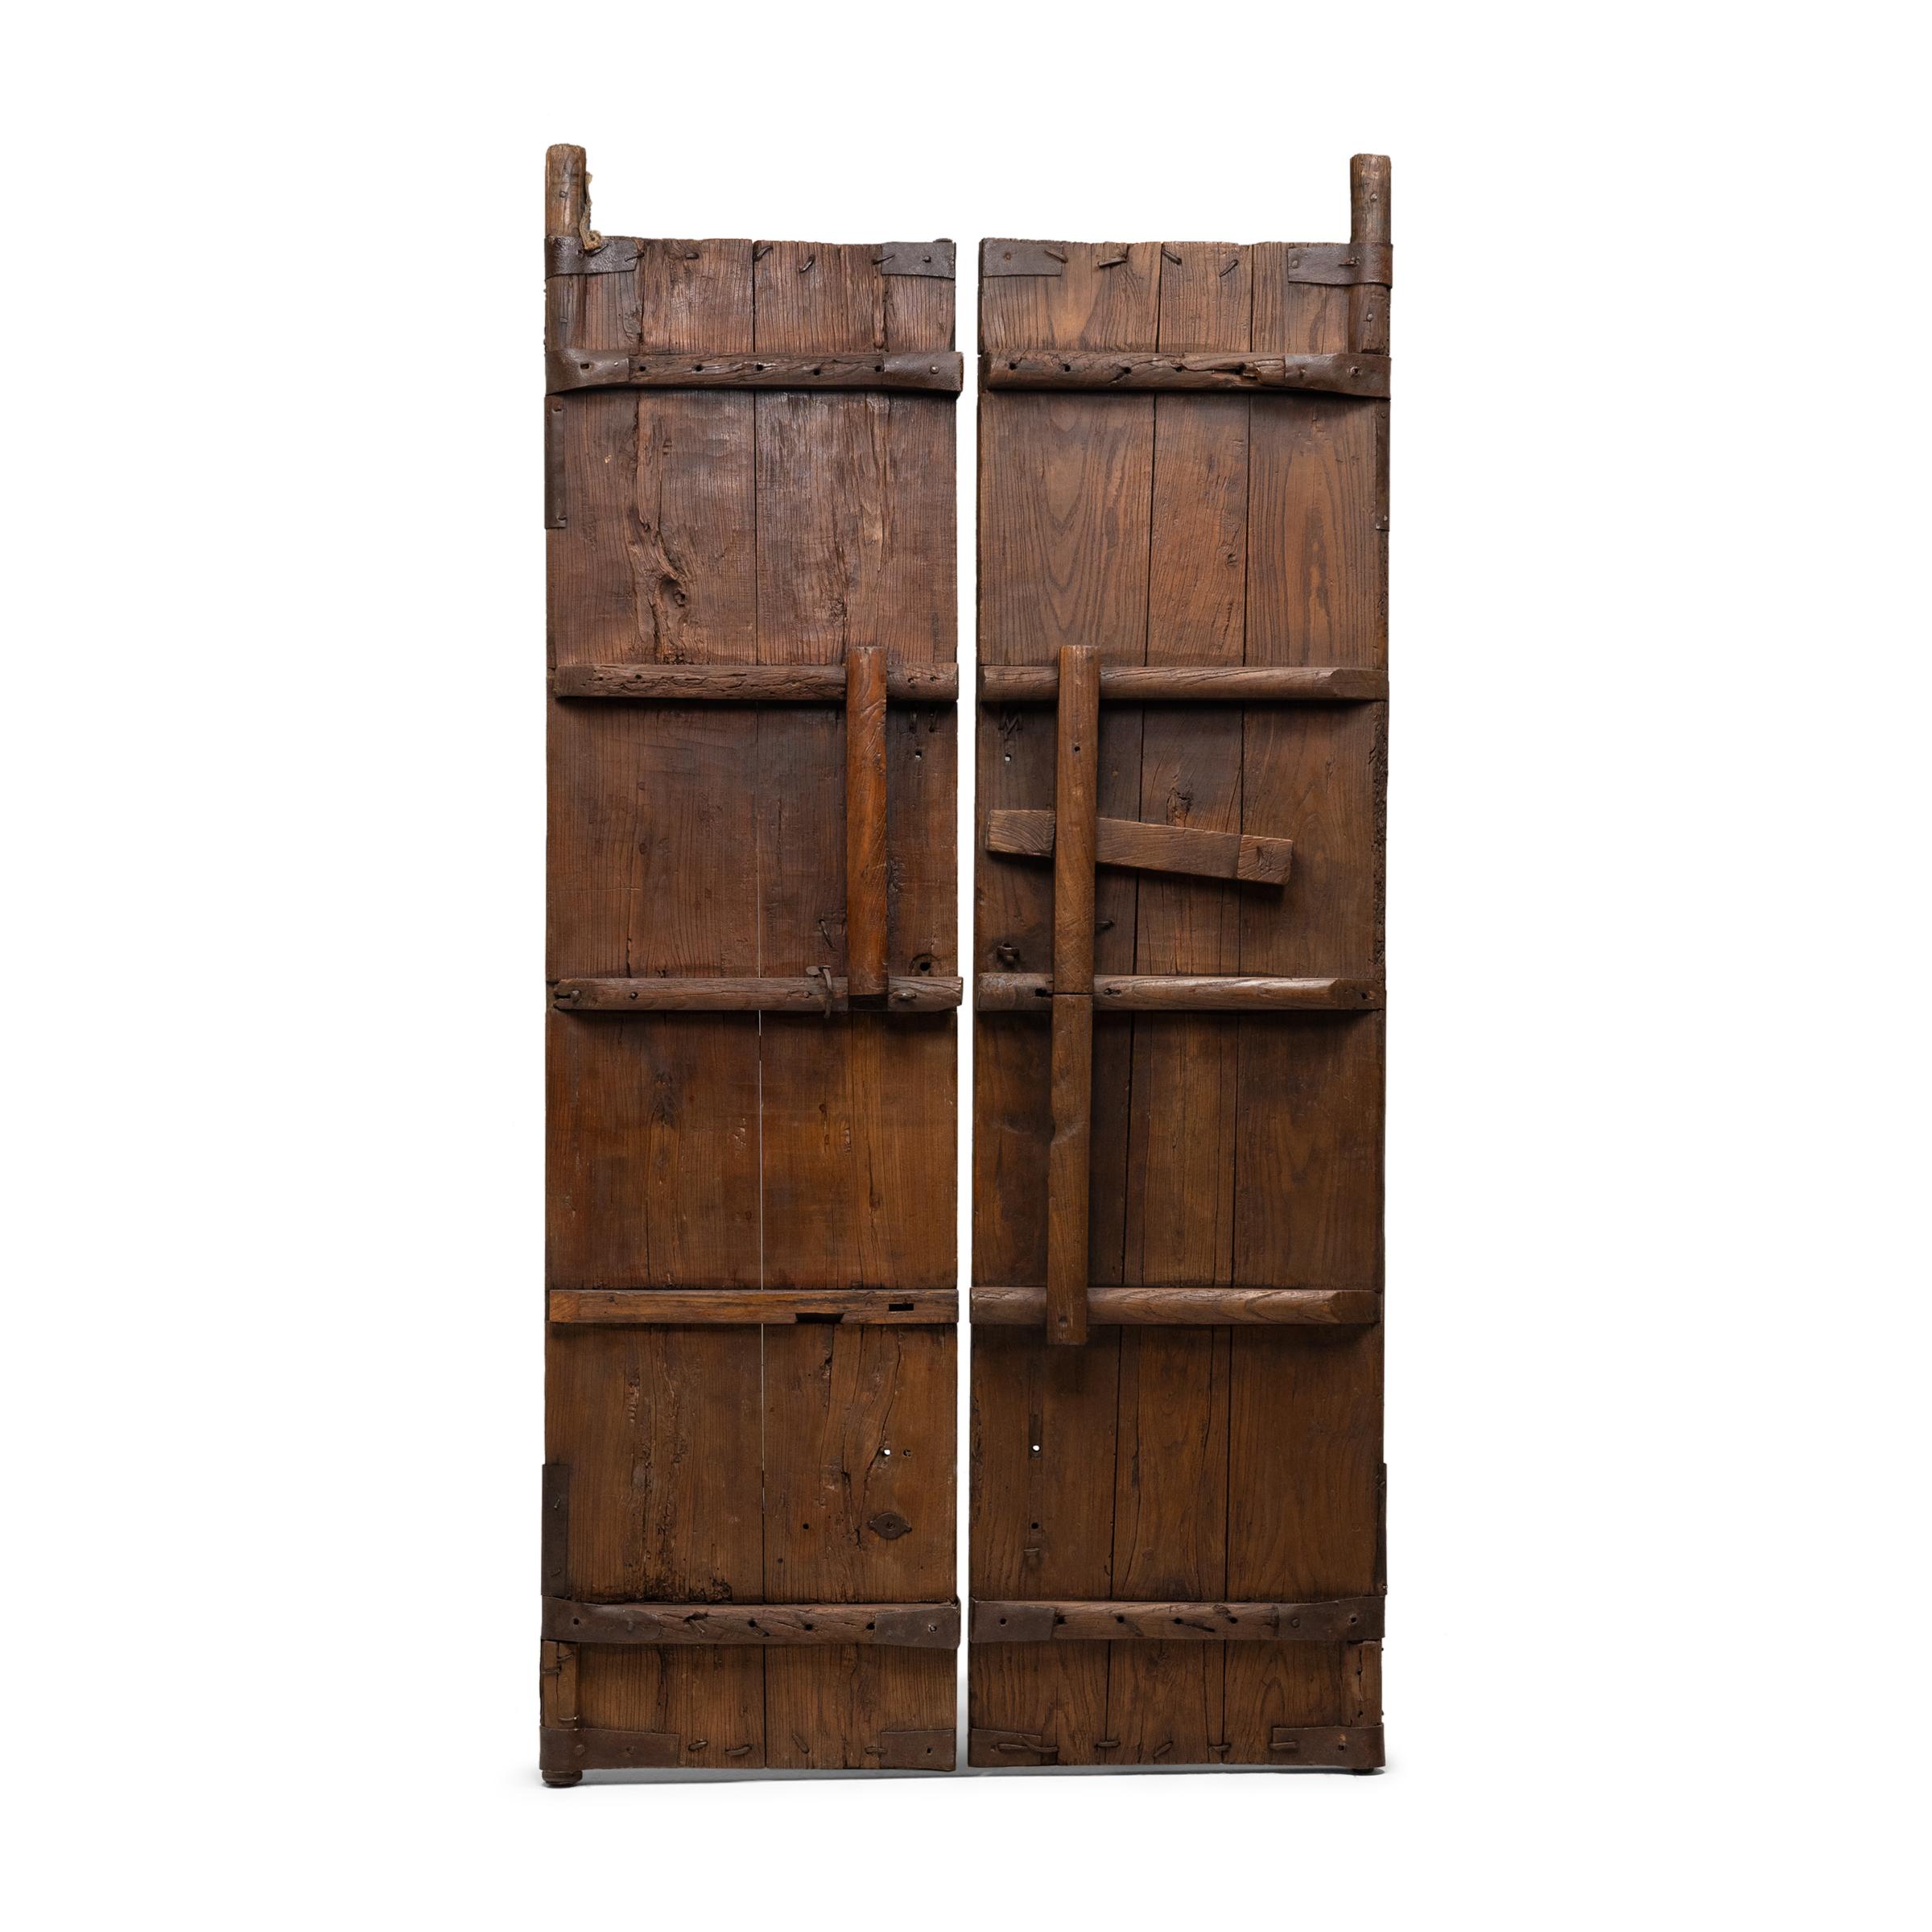 19th Century Pair of Chinese Iron Bound Courtyard Doors, c. 1850 For Sale